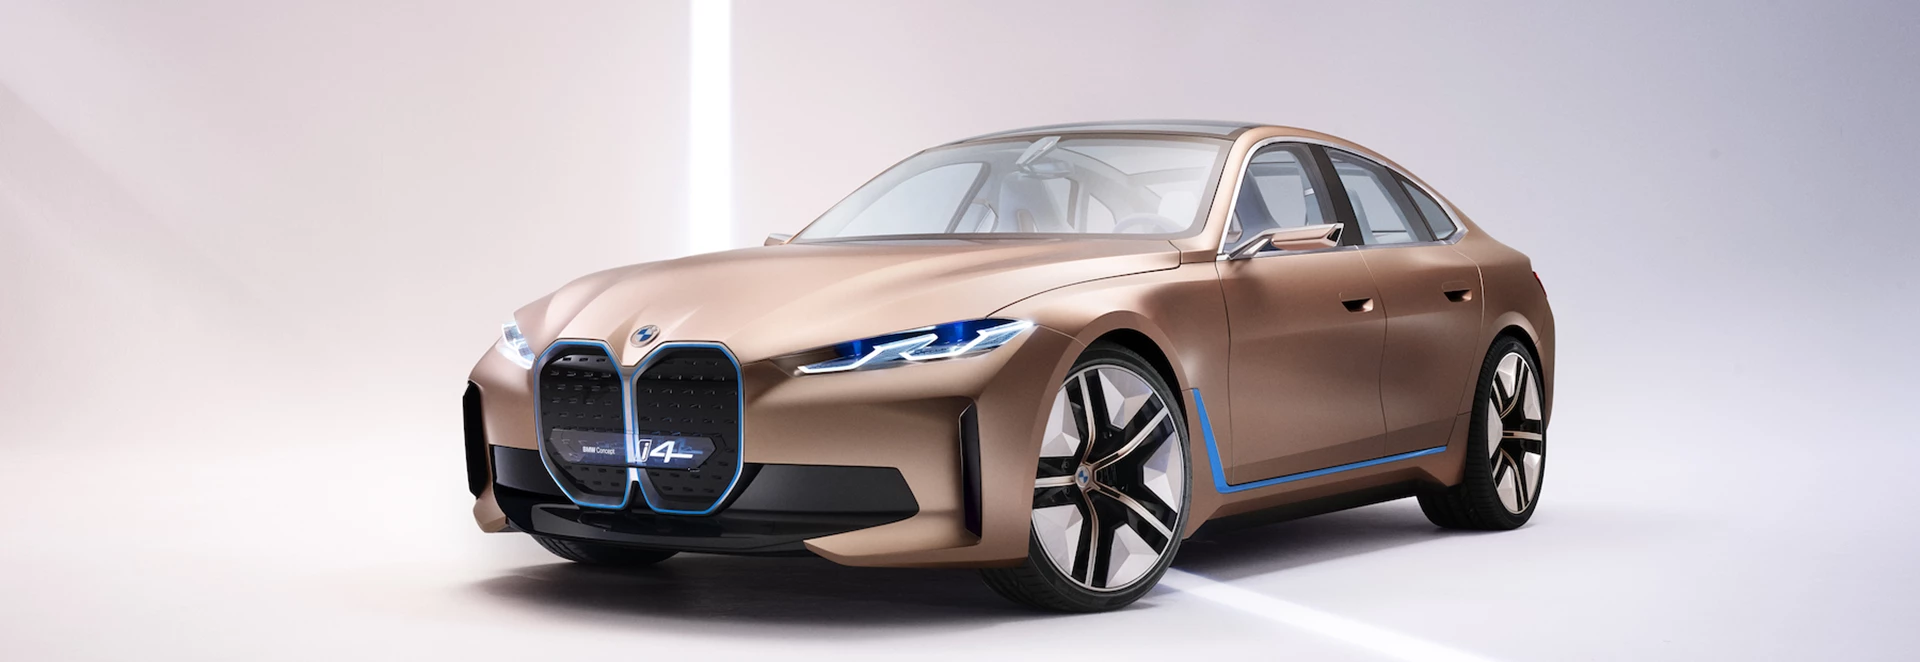 BMW unveils Concept i4 previewing new electric saloon